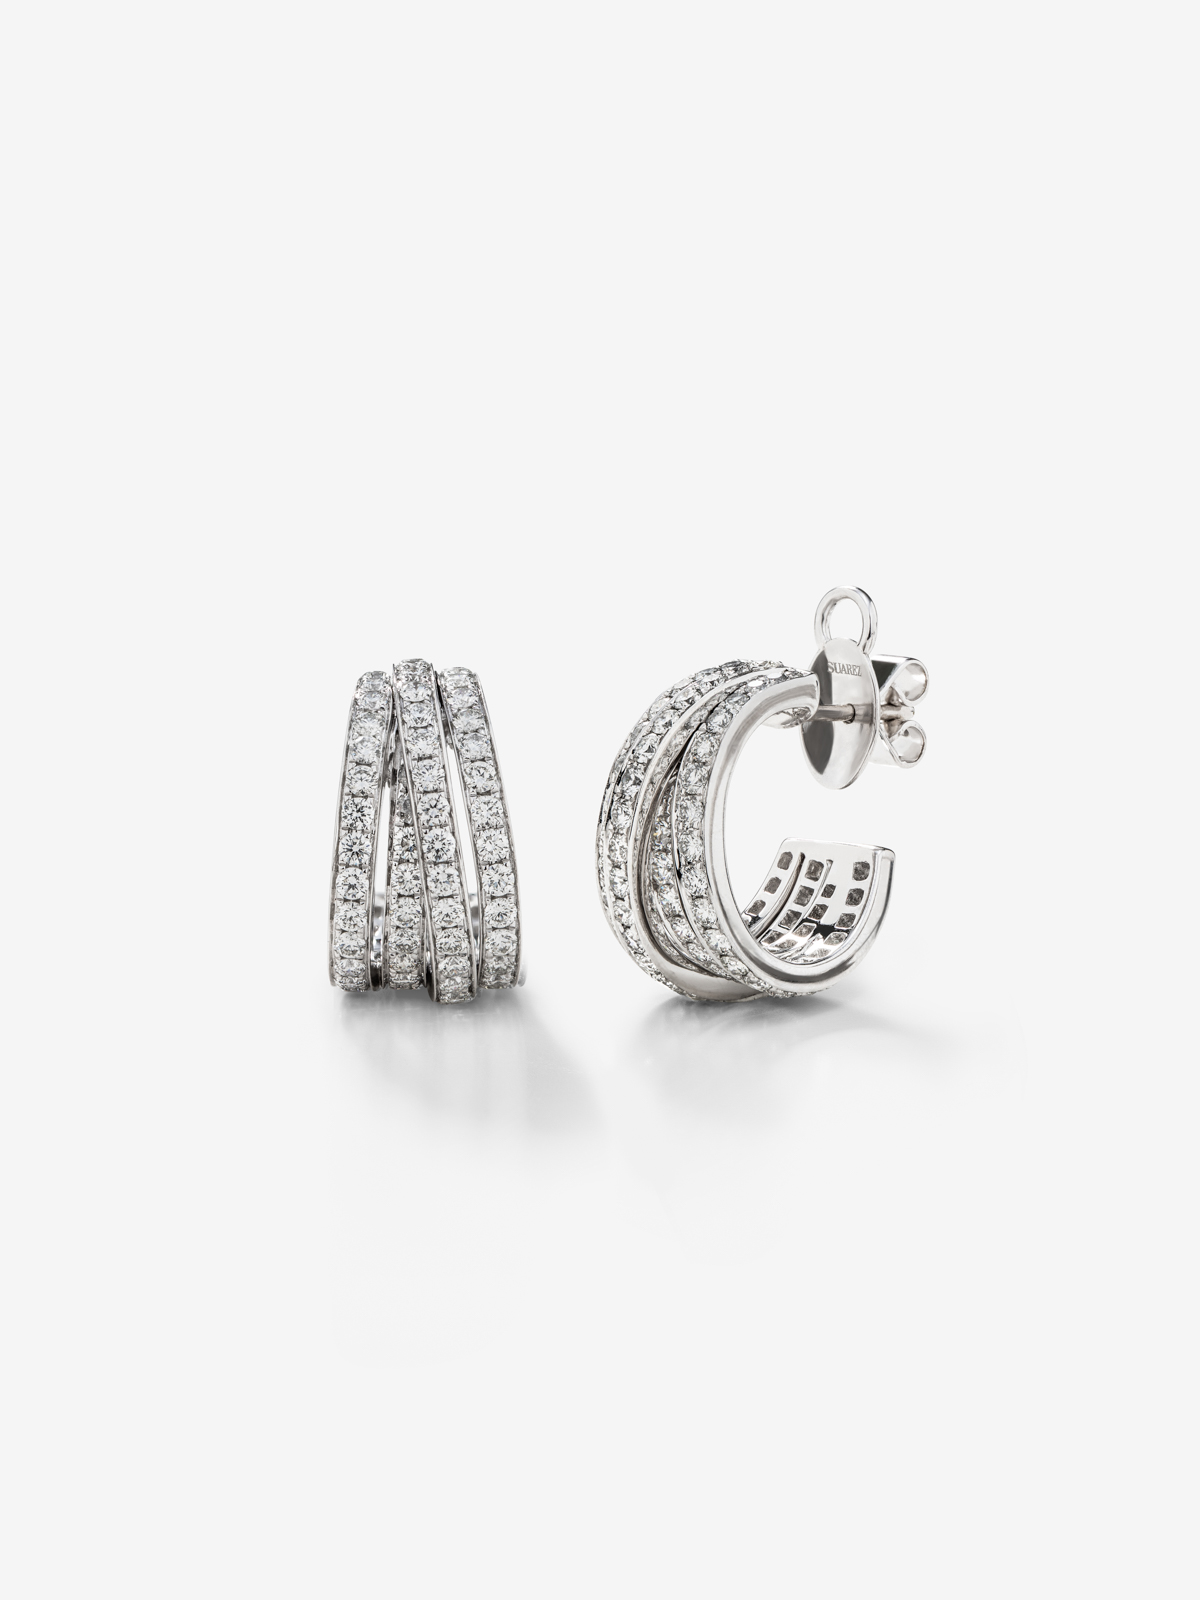 18K white gold ring earrings with white 2.9 cts bright diamonds